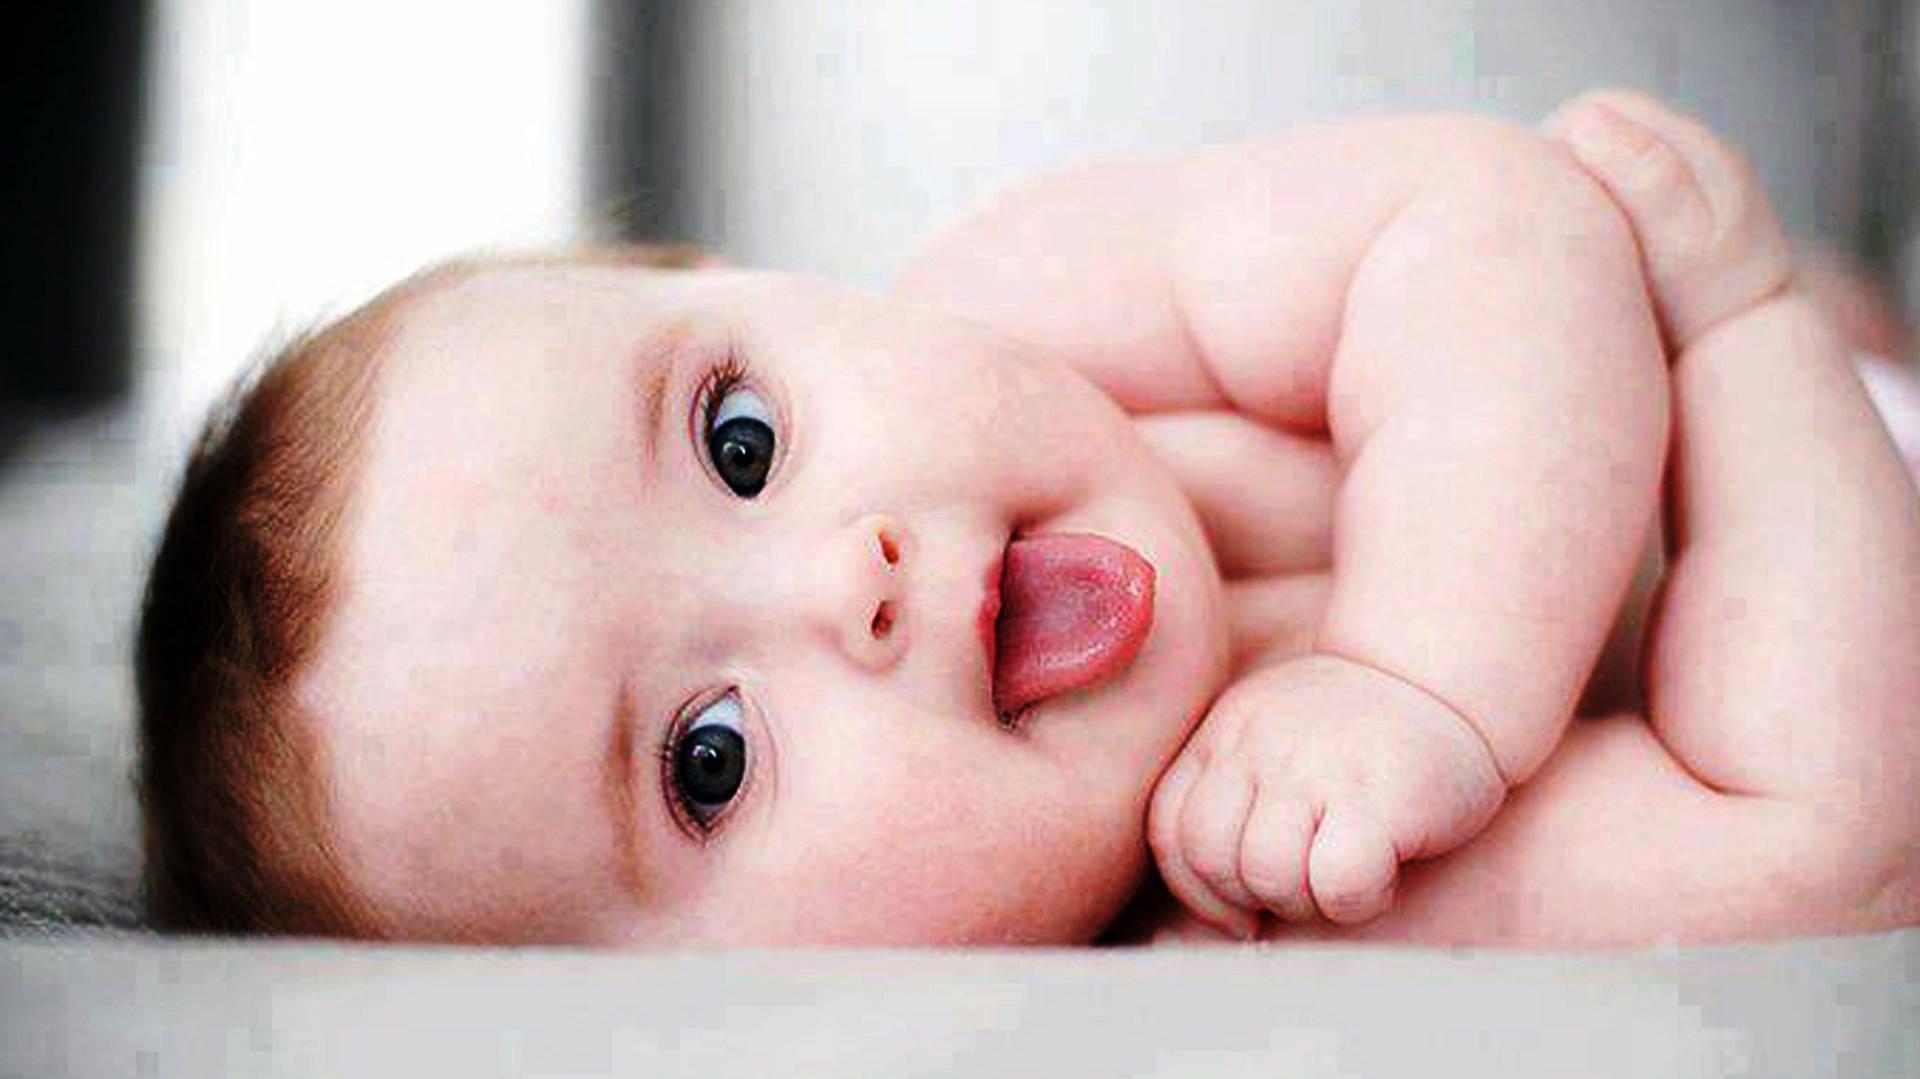 A Cute Baby Ready For Fun With His Tongue Out Wallpaper